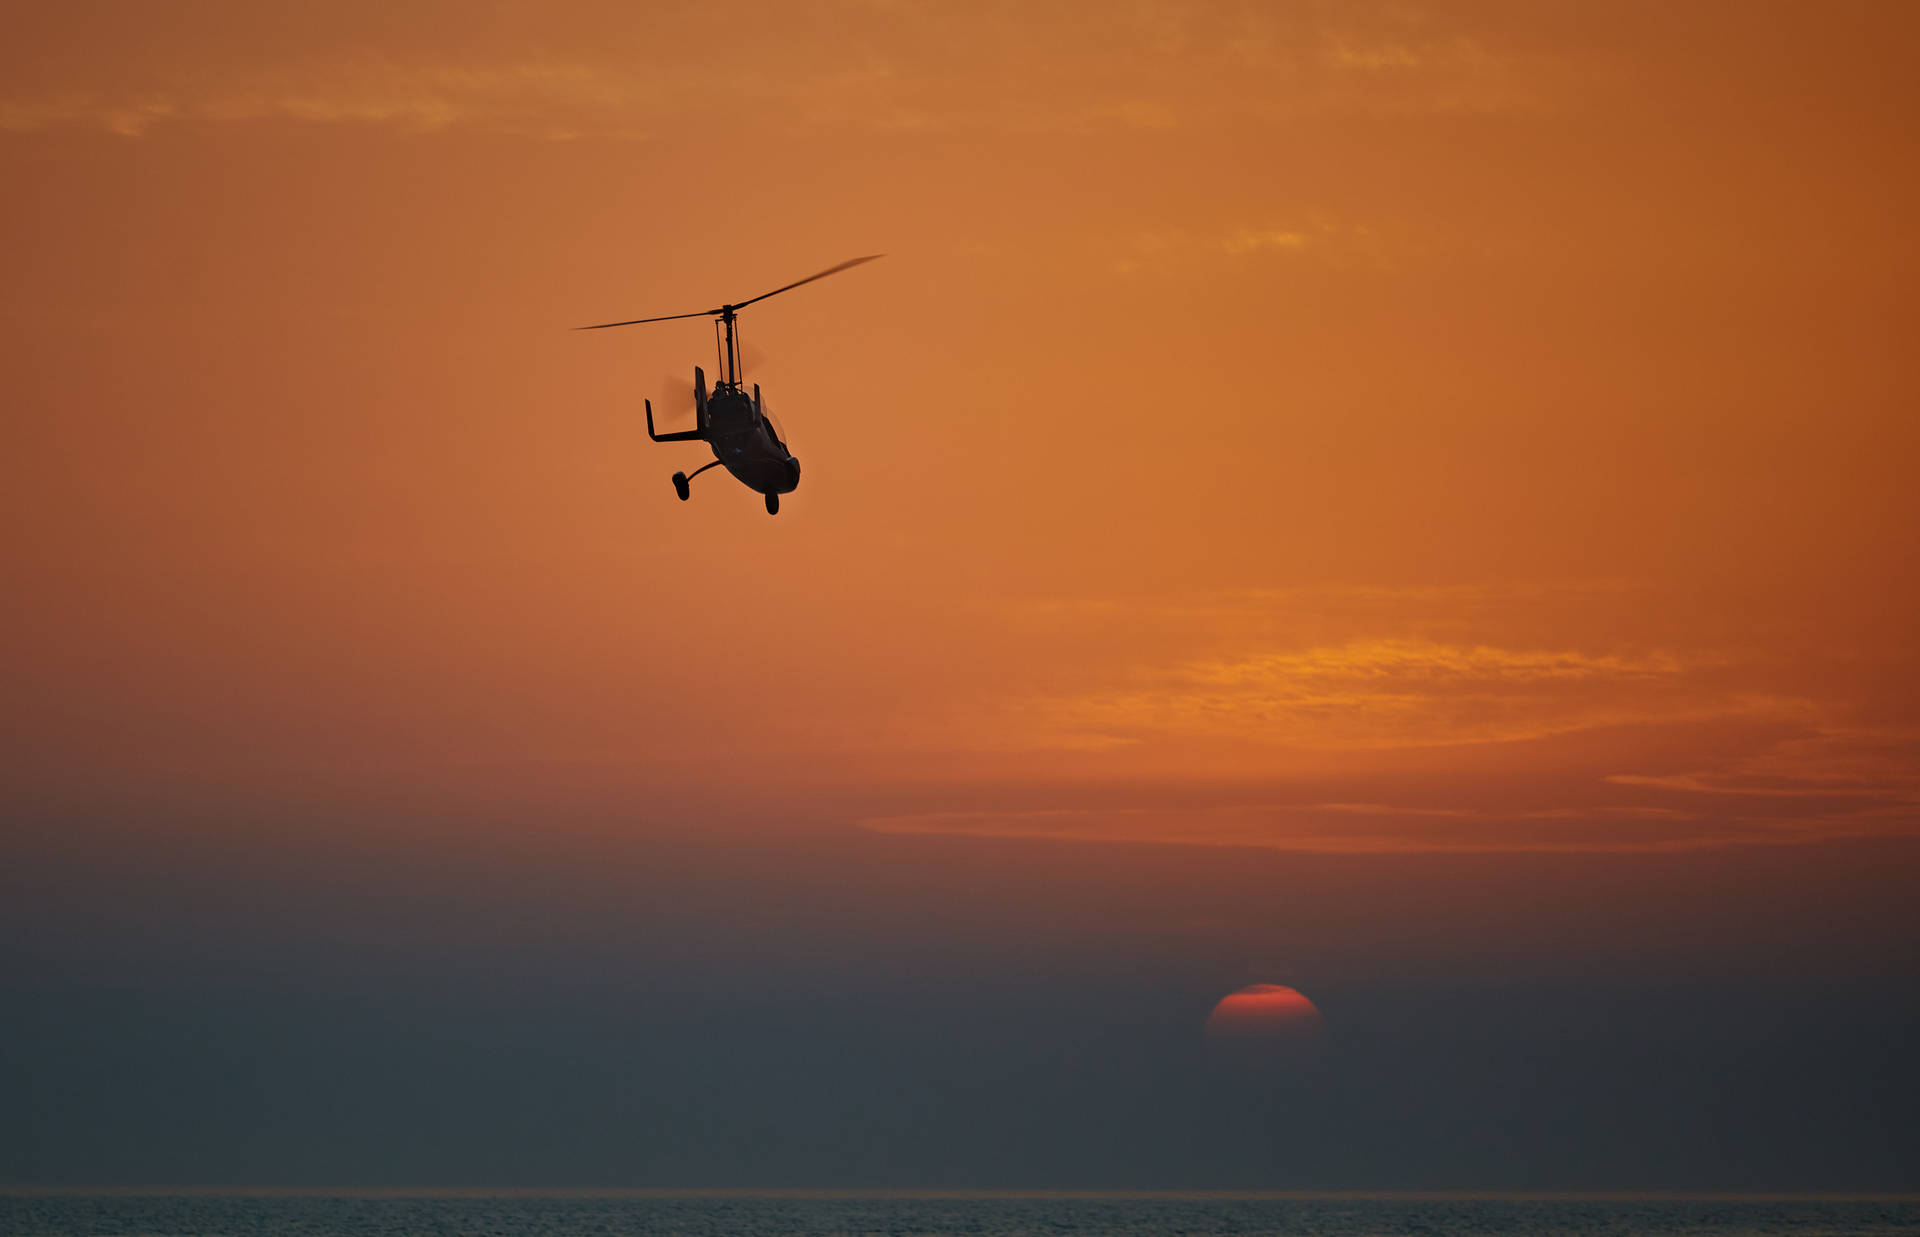 Sunset With Helicopter 4k